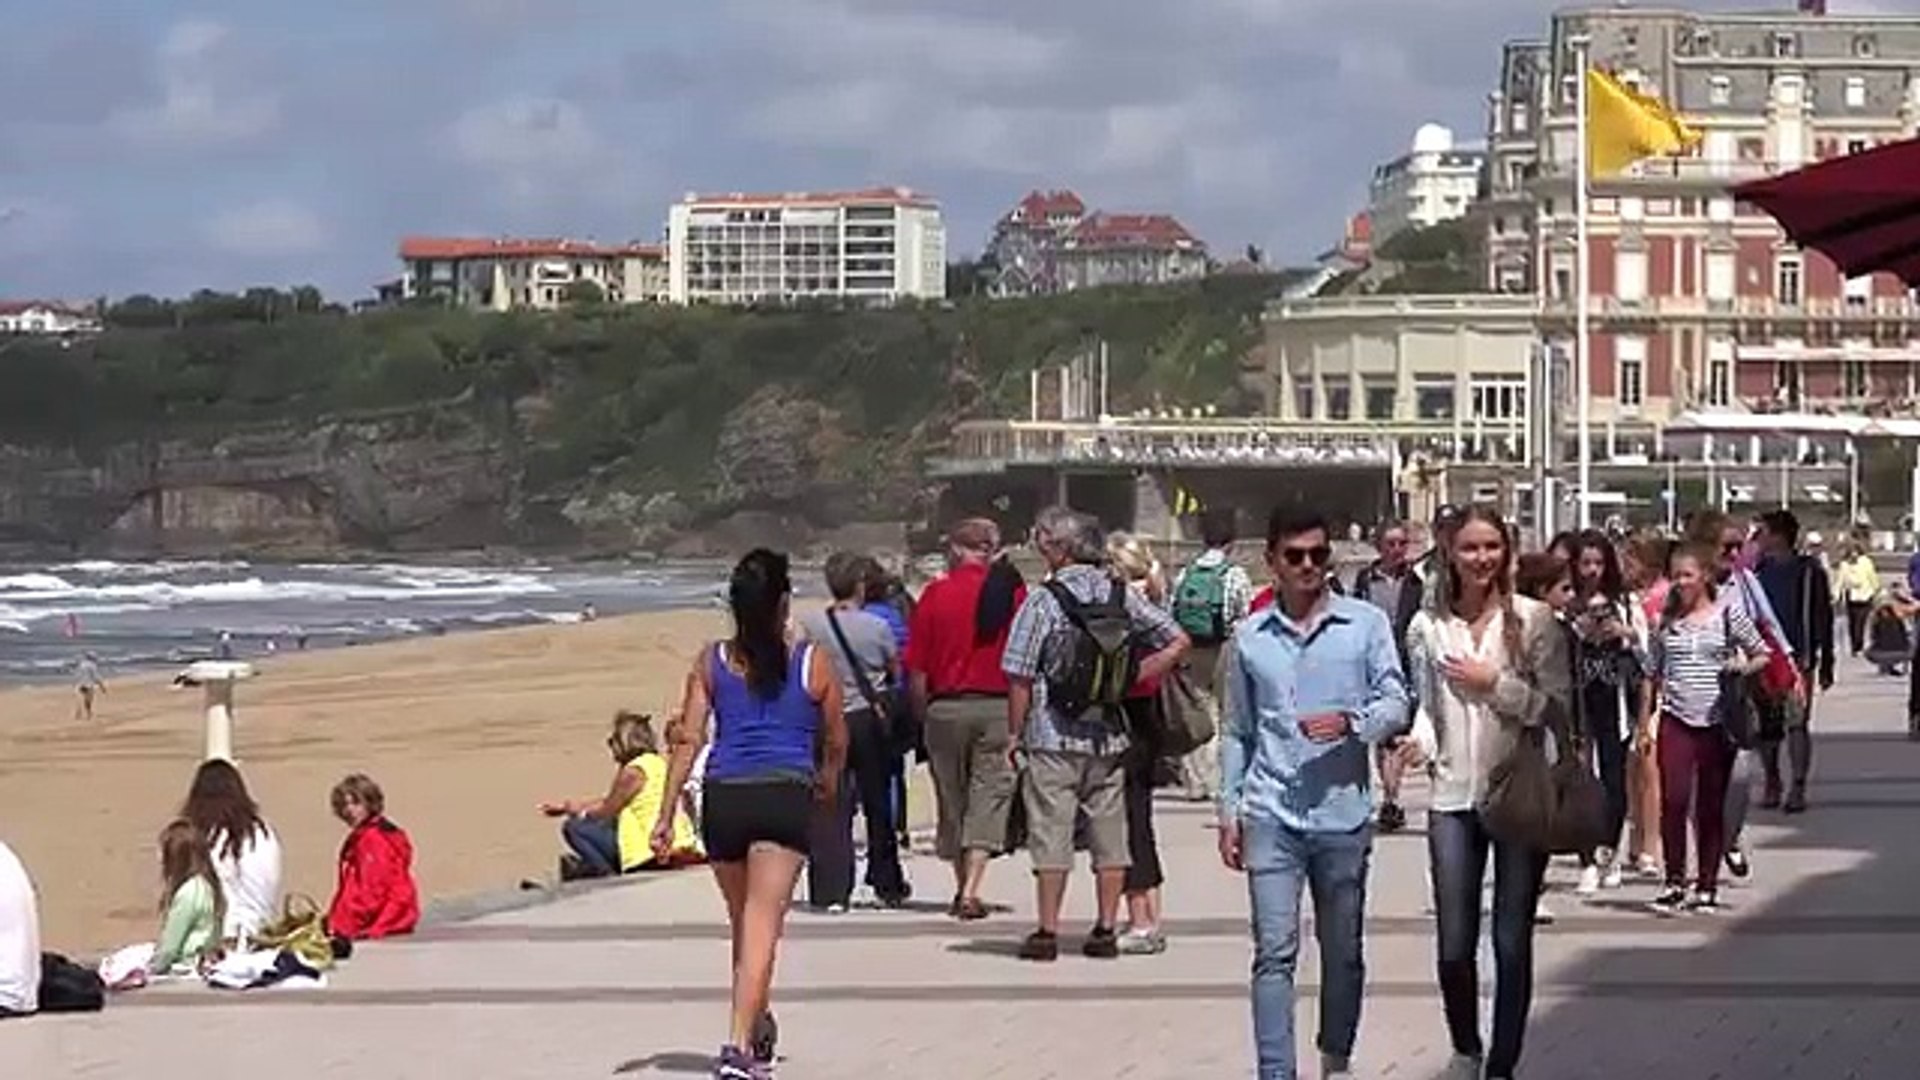 Biarritz in Basque Country in France - Biarritz au Pays Basque tourisme - surfing paradise